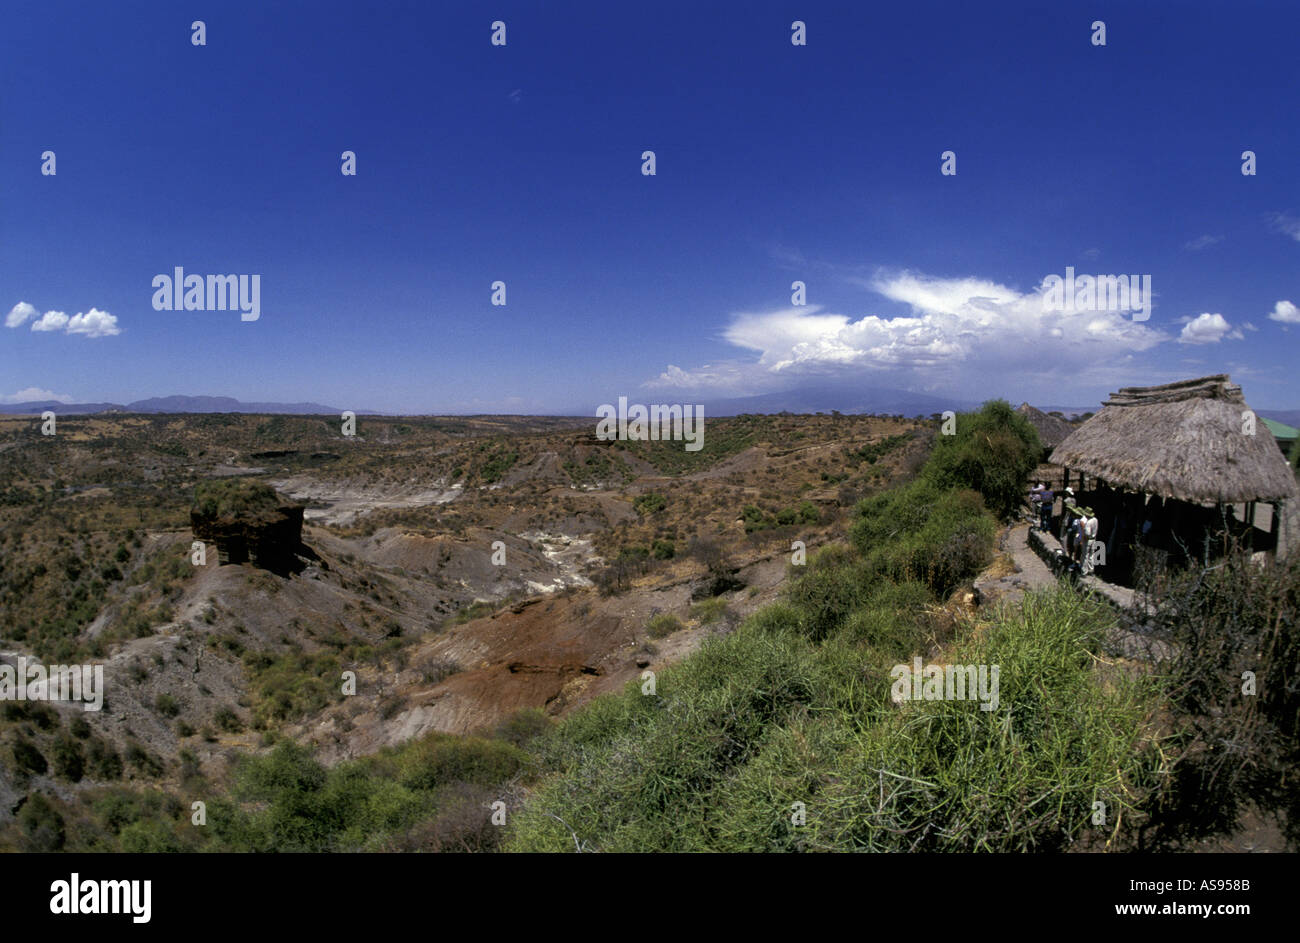 The Ol Duvai Gorge northern Tanzania East Africa Stock Photo